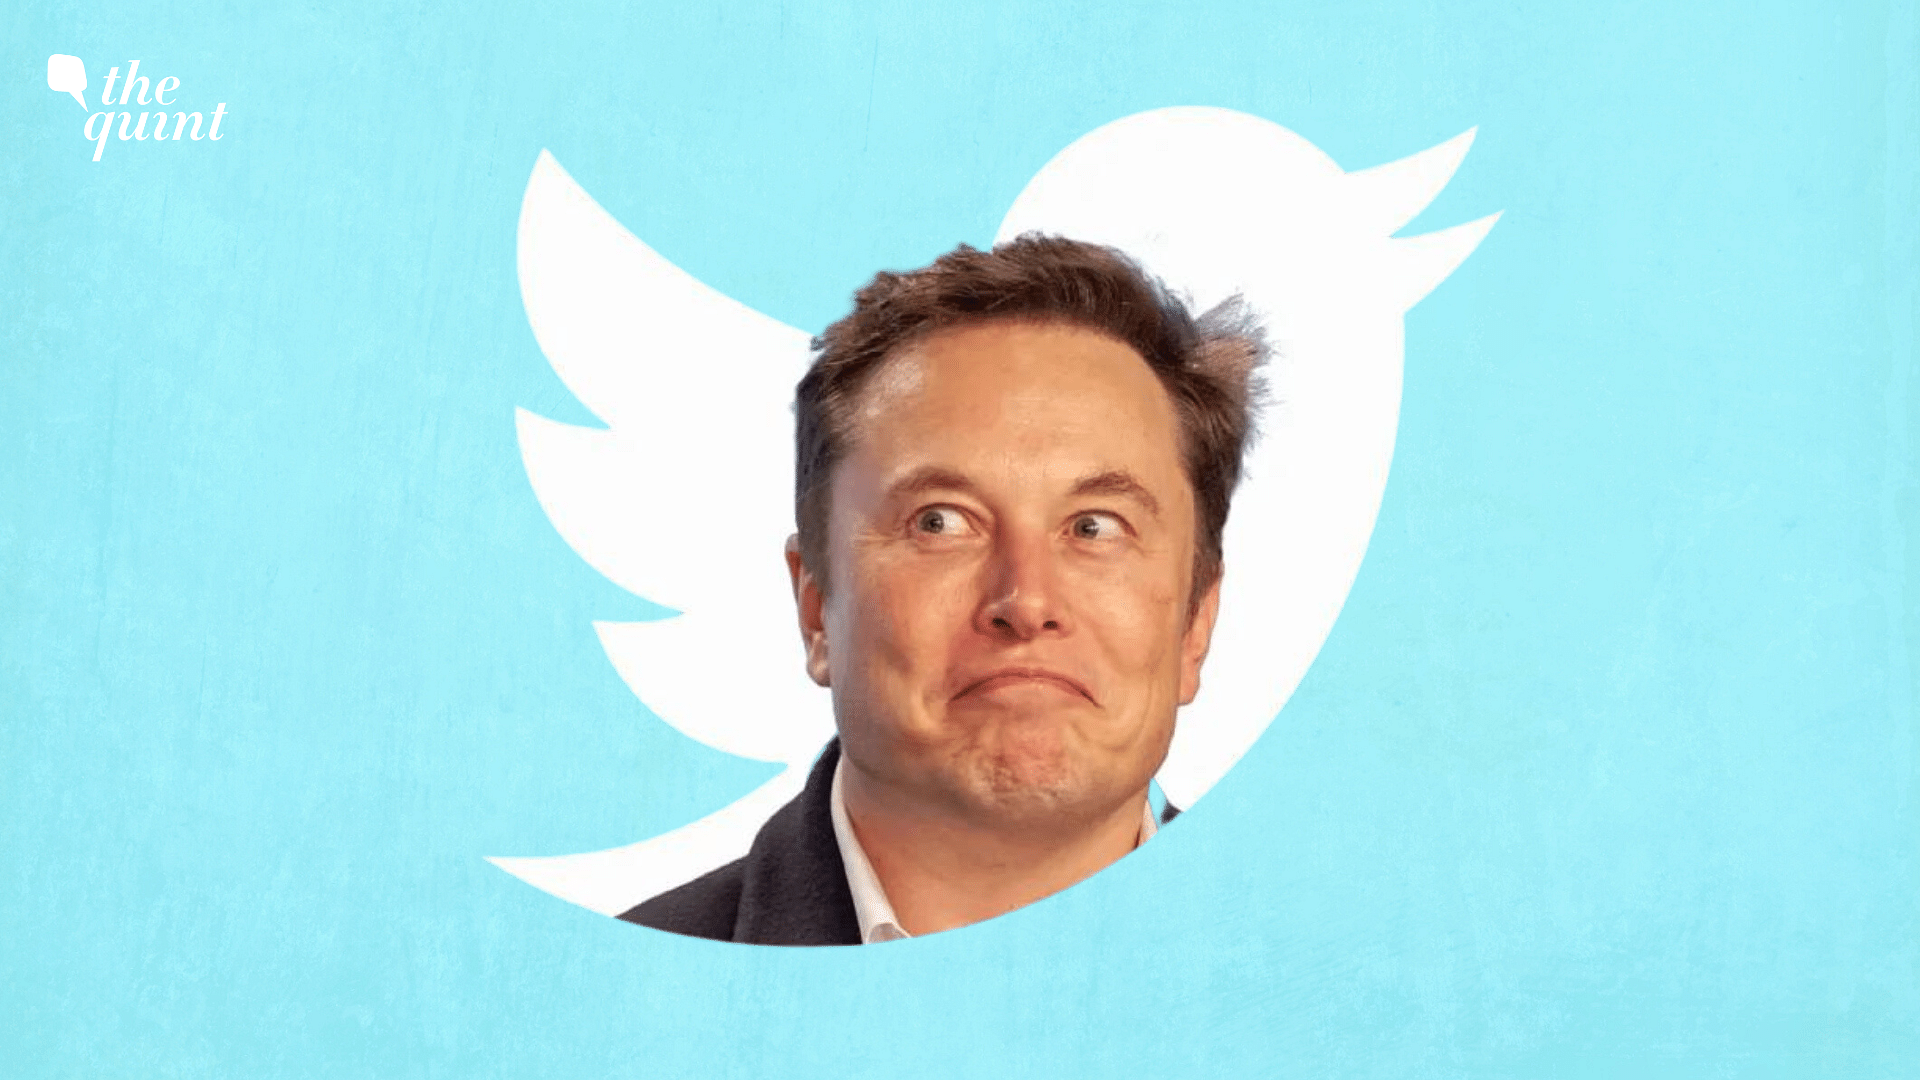 <div class="paragraphs"><p>After months of negotiations, lawsuits and speculation, billionaire <a href="https://www.thequint.com/elon-musk-acquires-twitter">Elon Musk</a>  finally bought&nbsp;<a href="https://www.thequint.com/elon-musk-acquires-twitter">Twitter</a>.</p></div>